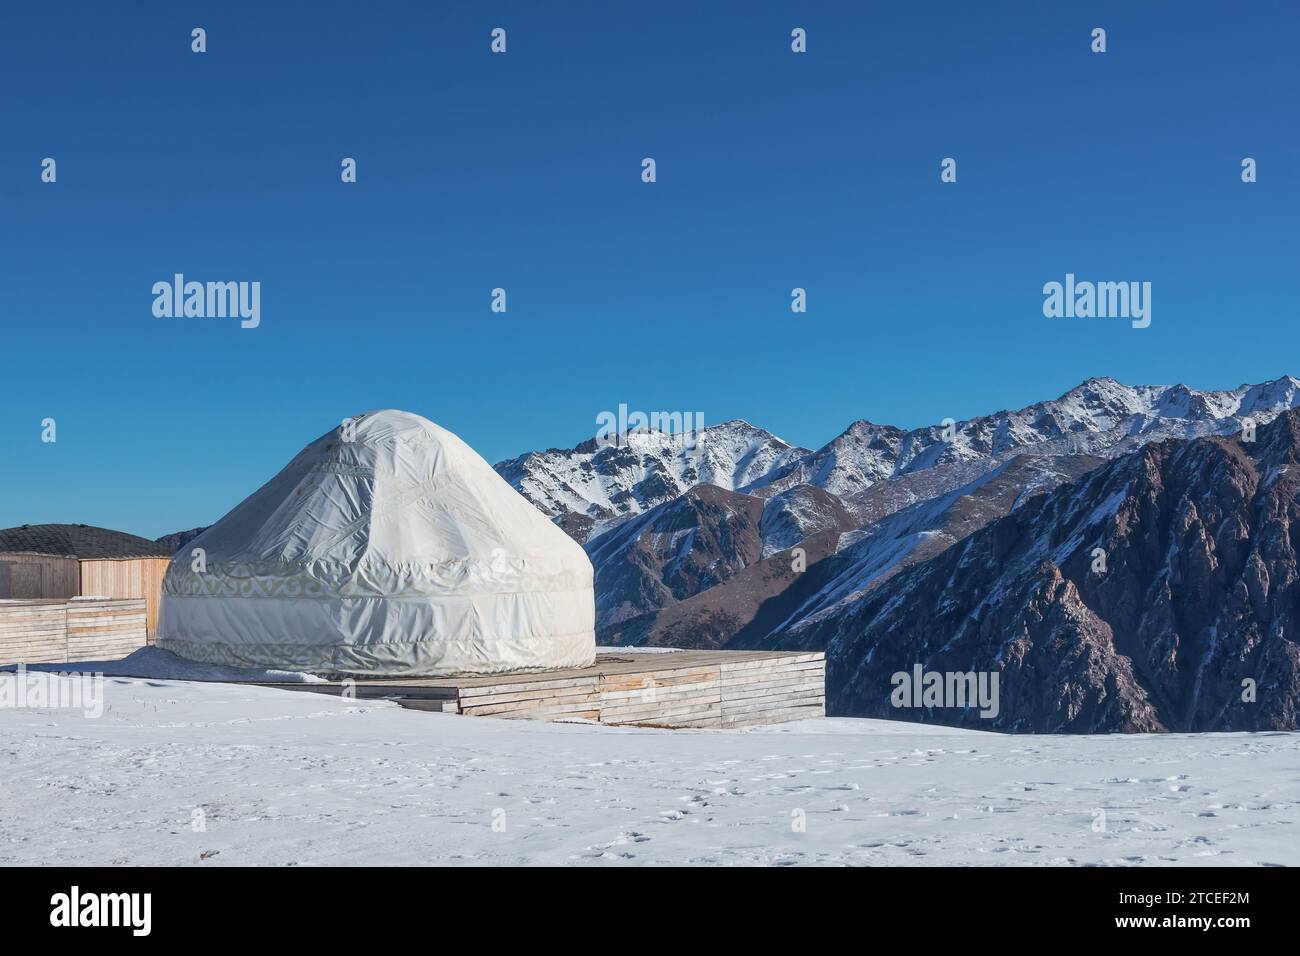 National house of the peoples of and Asian countries. Yurts on the background of snow peaks mountains and highlands. Yurt camp for tourists Stock Photo